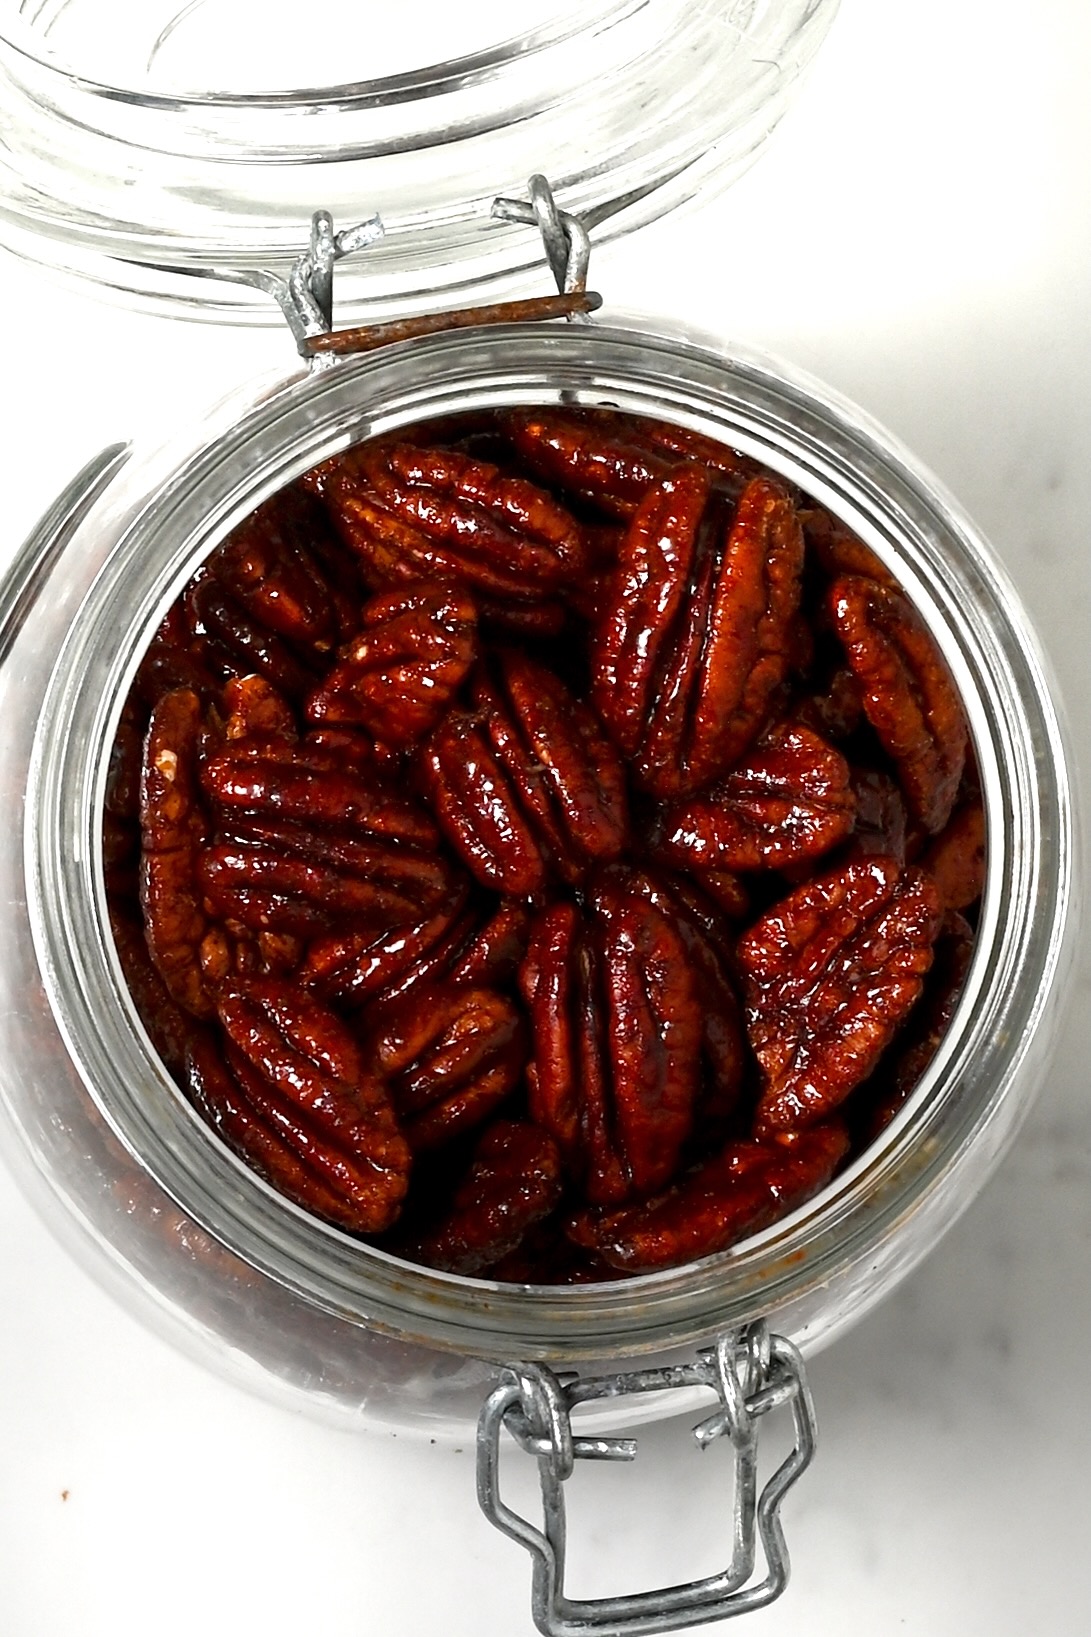 A jar filled with homemade candied pecans